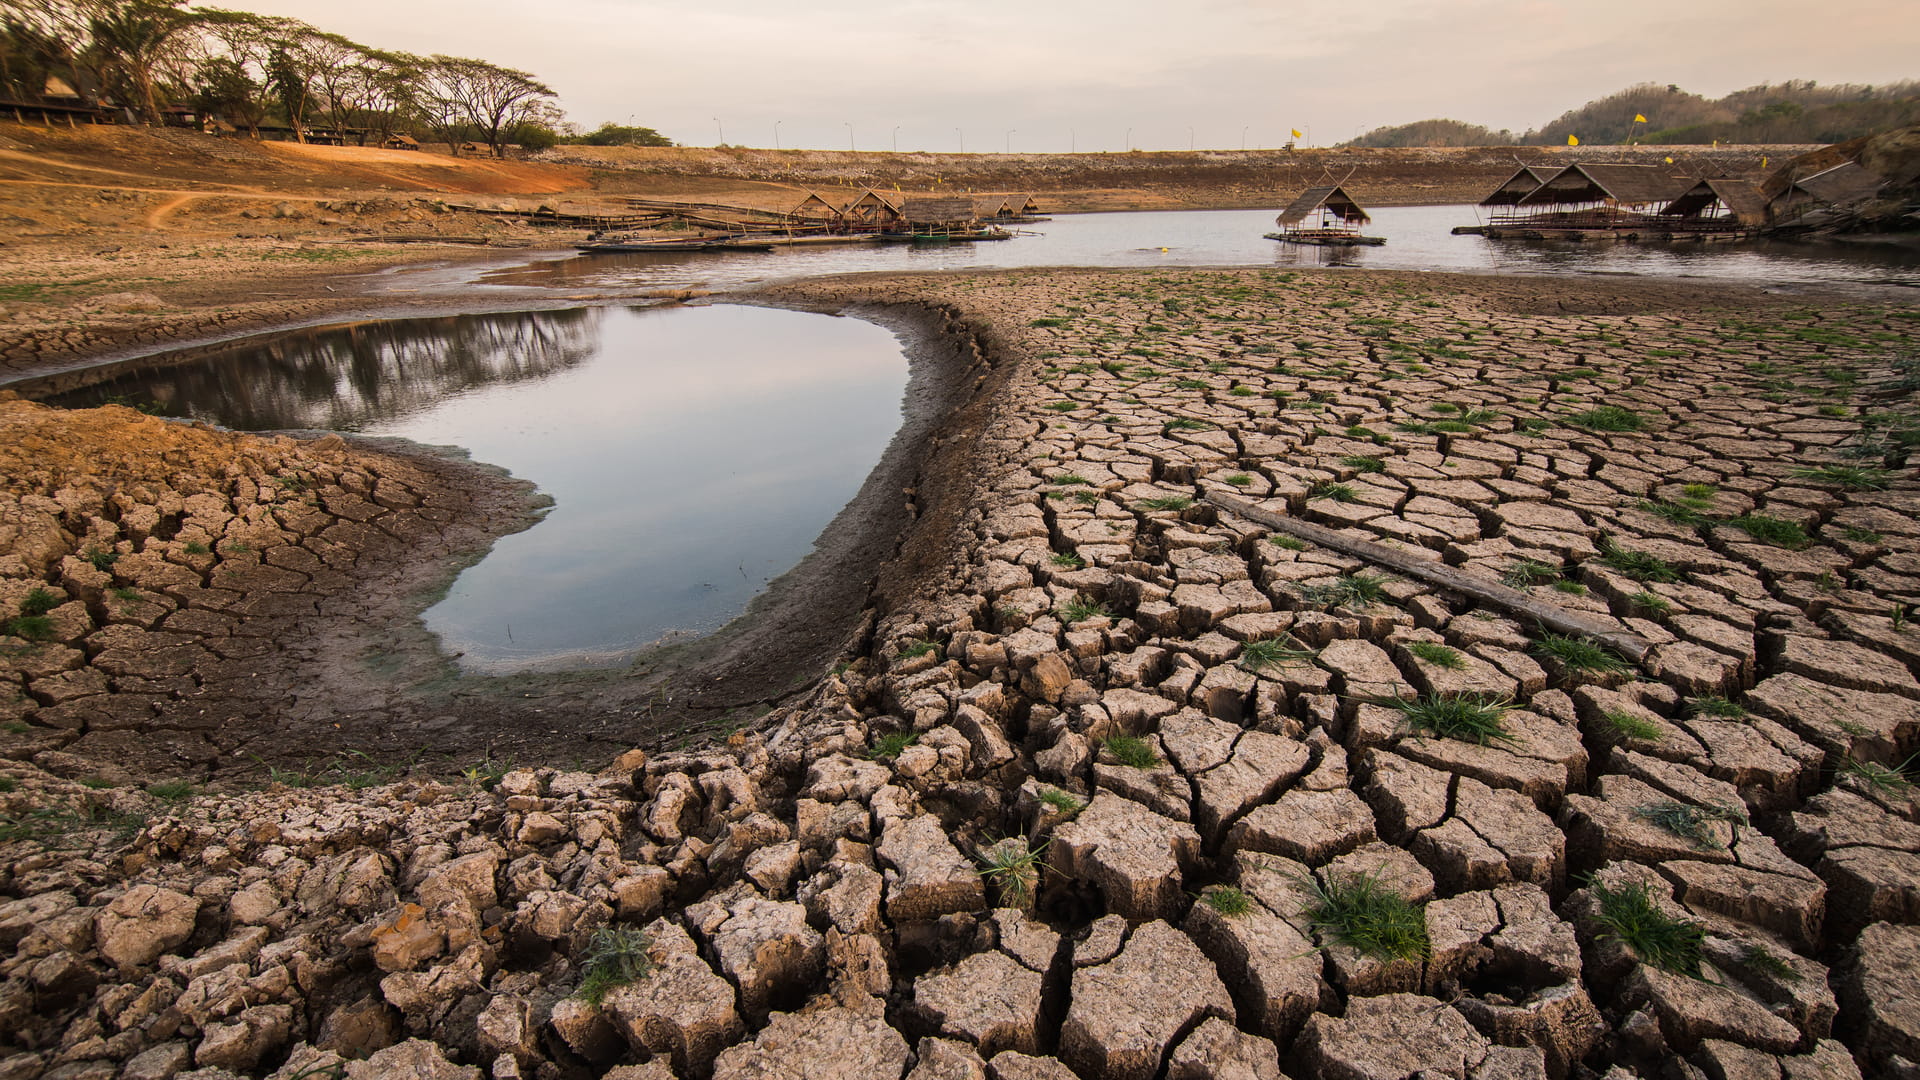 the drought ground due to global warming